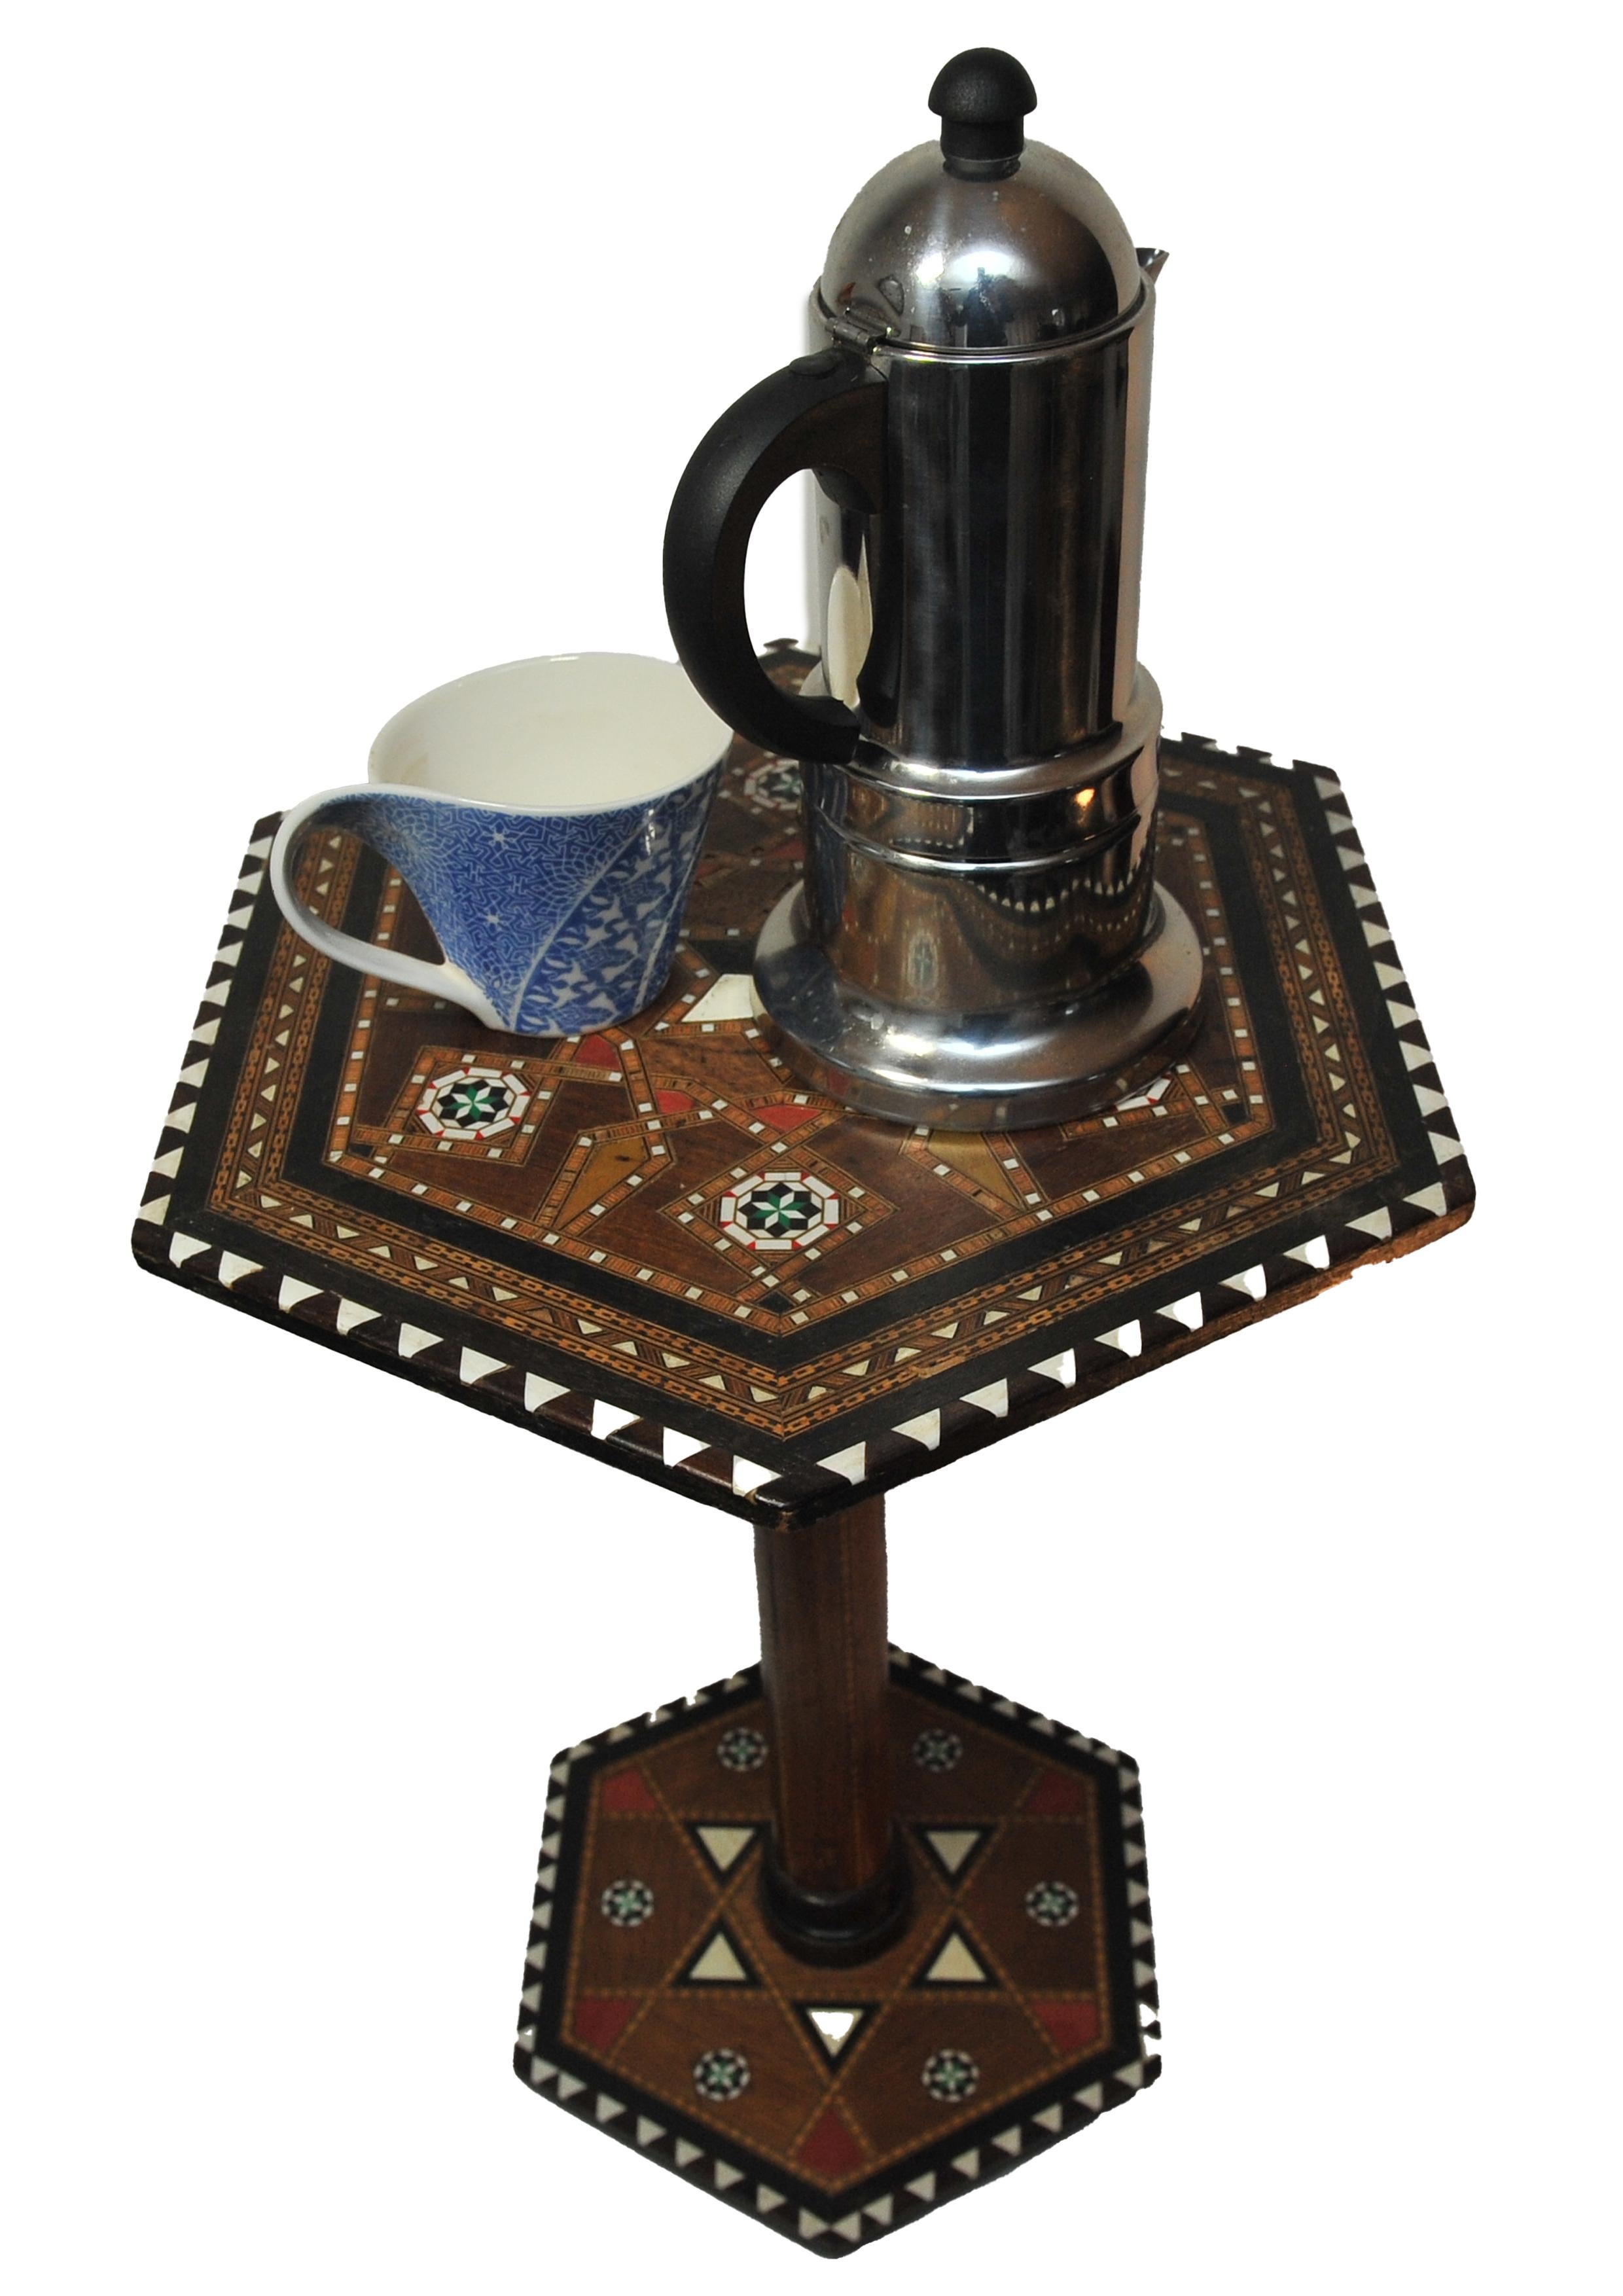 Parquetry A 19th Century Hexagonal Moorish Fruitwood Tea Table With Mosaic Detailing  For Sale